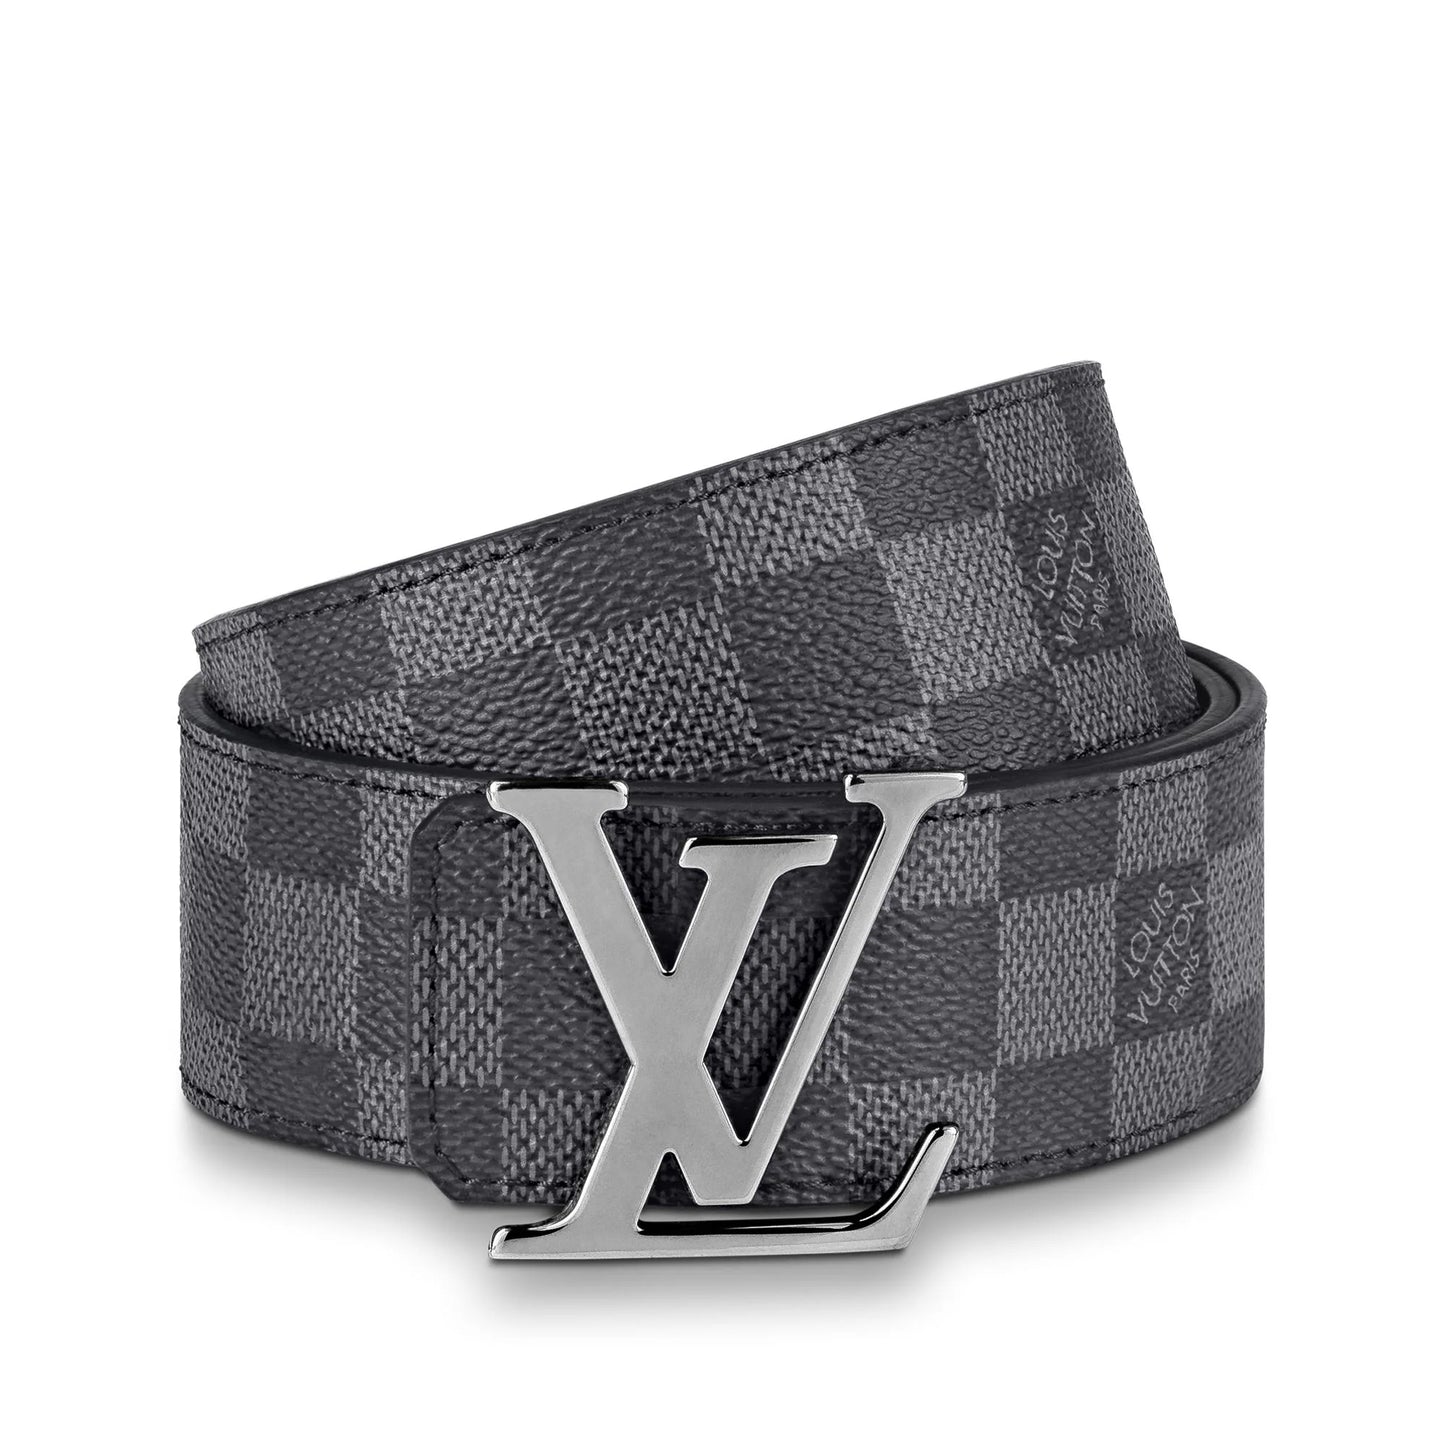 L-V Chequered Belt - Black and Silver